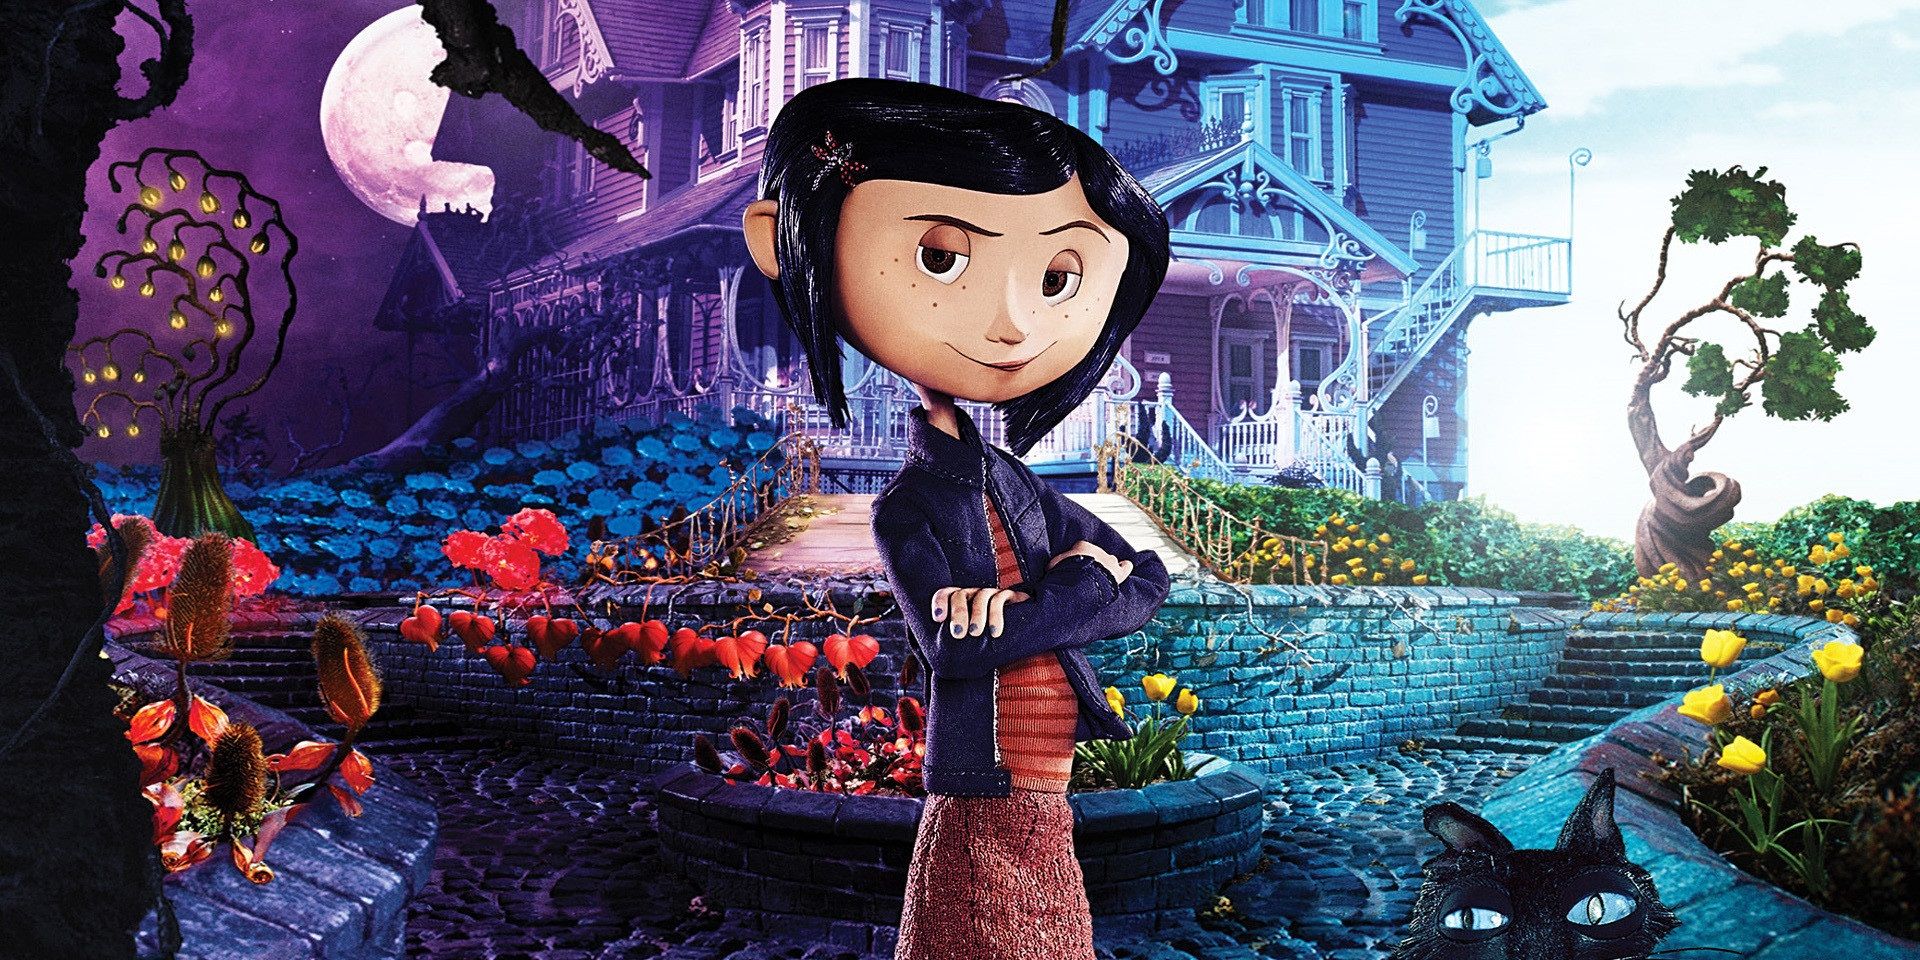 Coraline - top 10 stop motion animated films